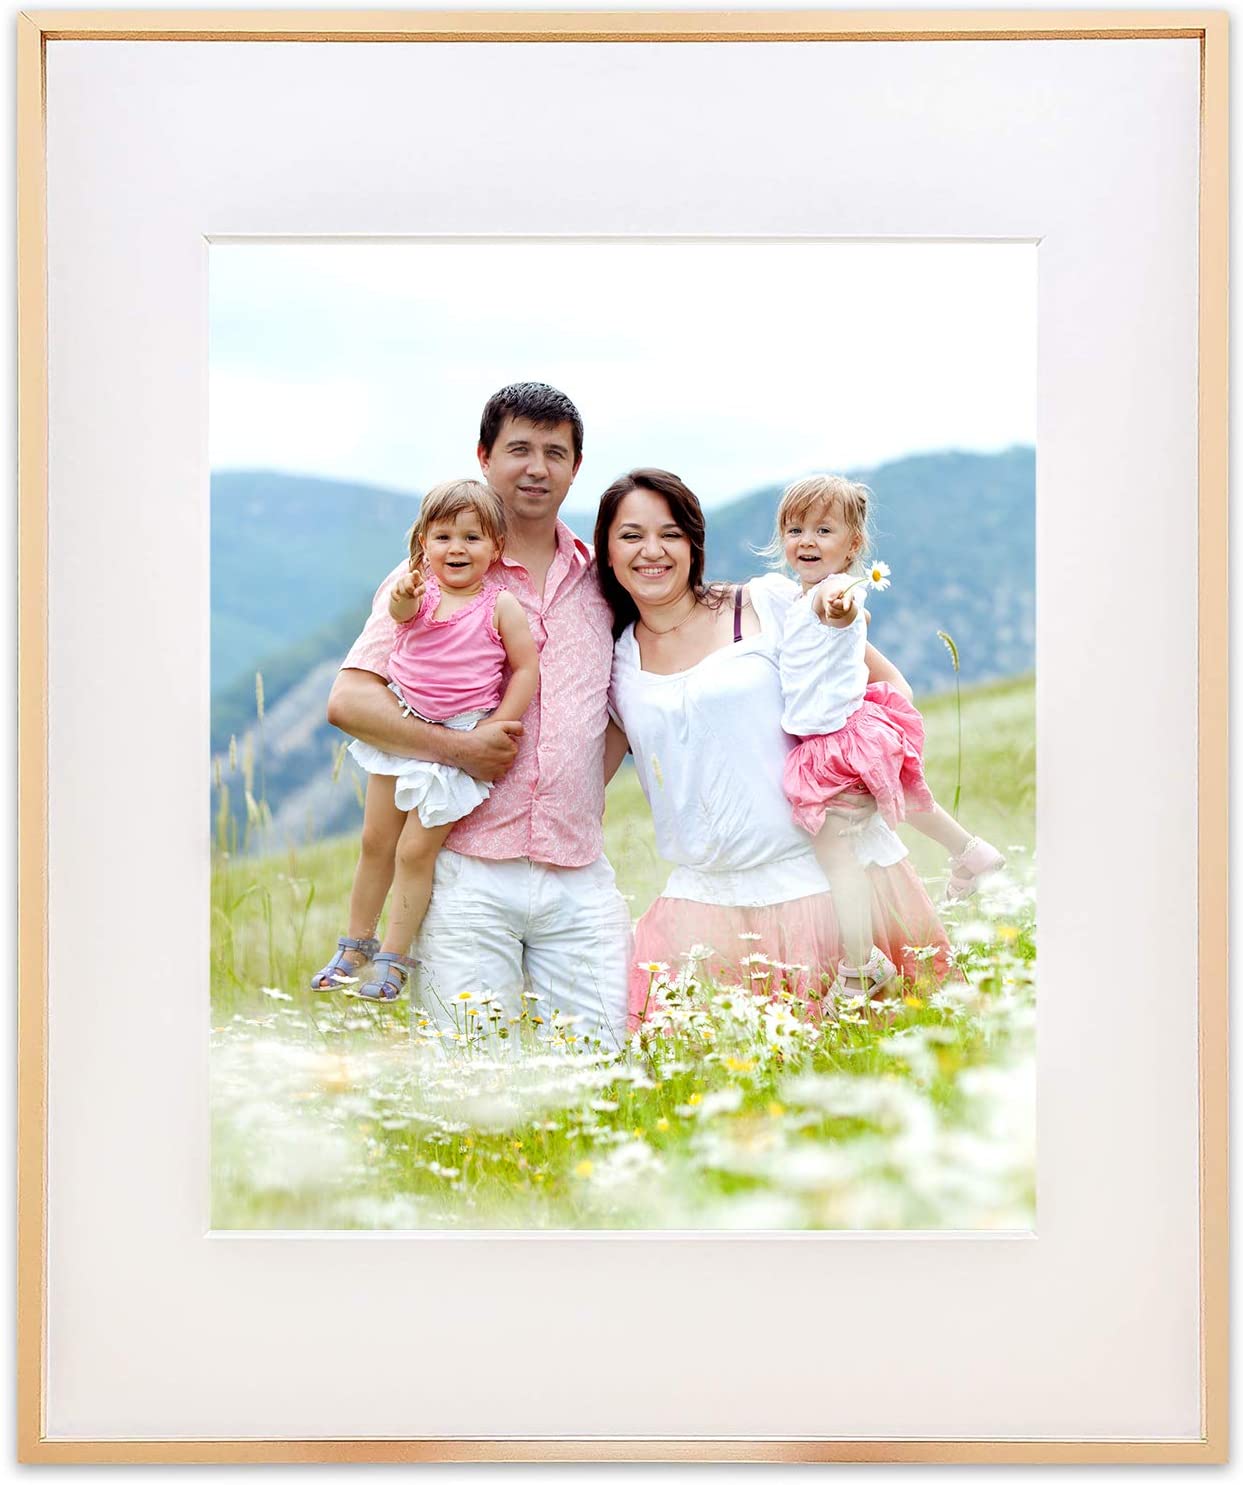 18" x 24" Gold Aluminum Picture Frame with Tempered Glass, 12" x 18" Matted